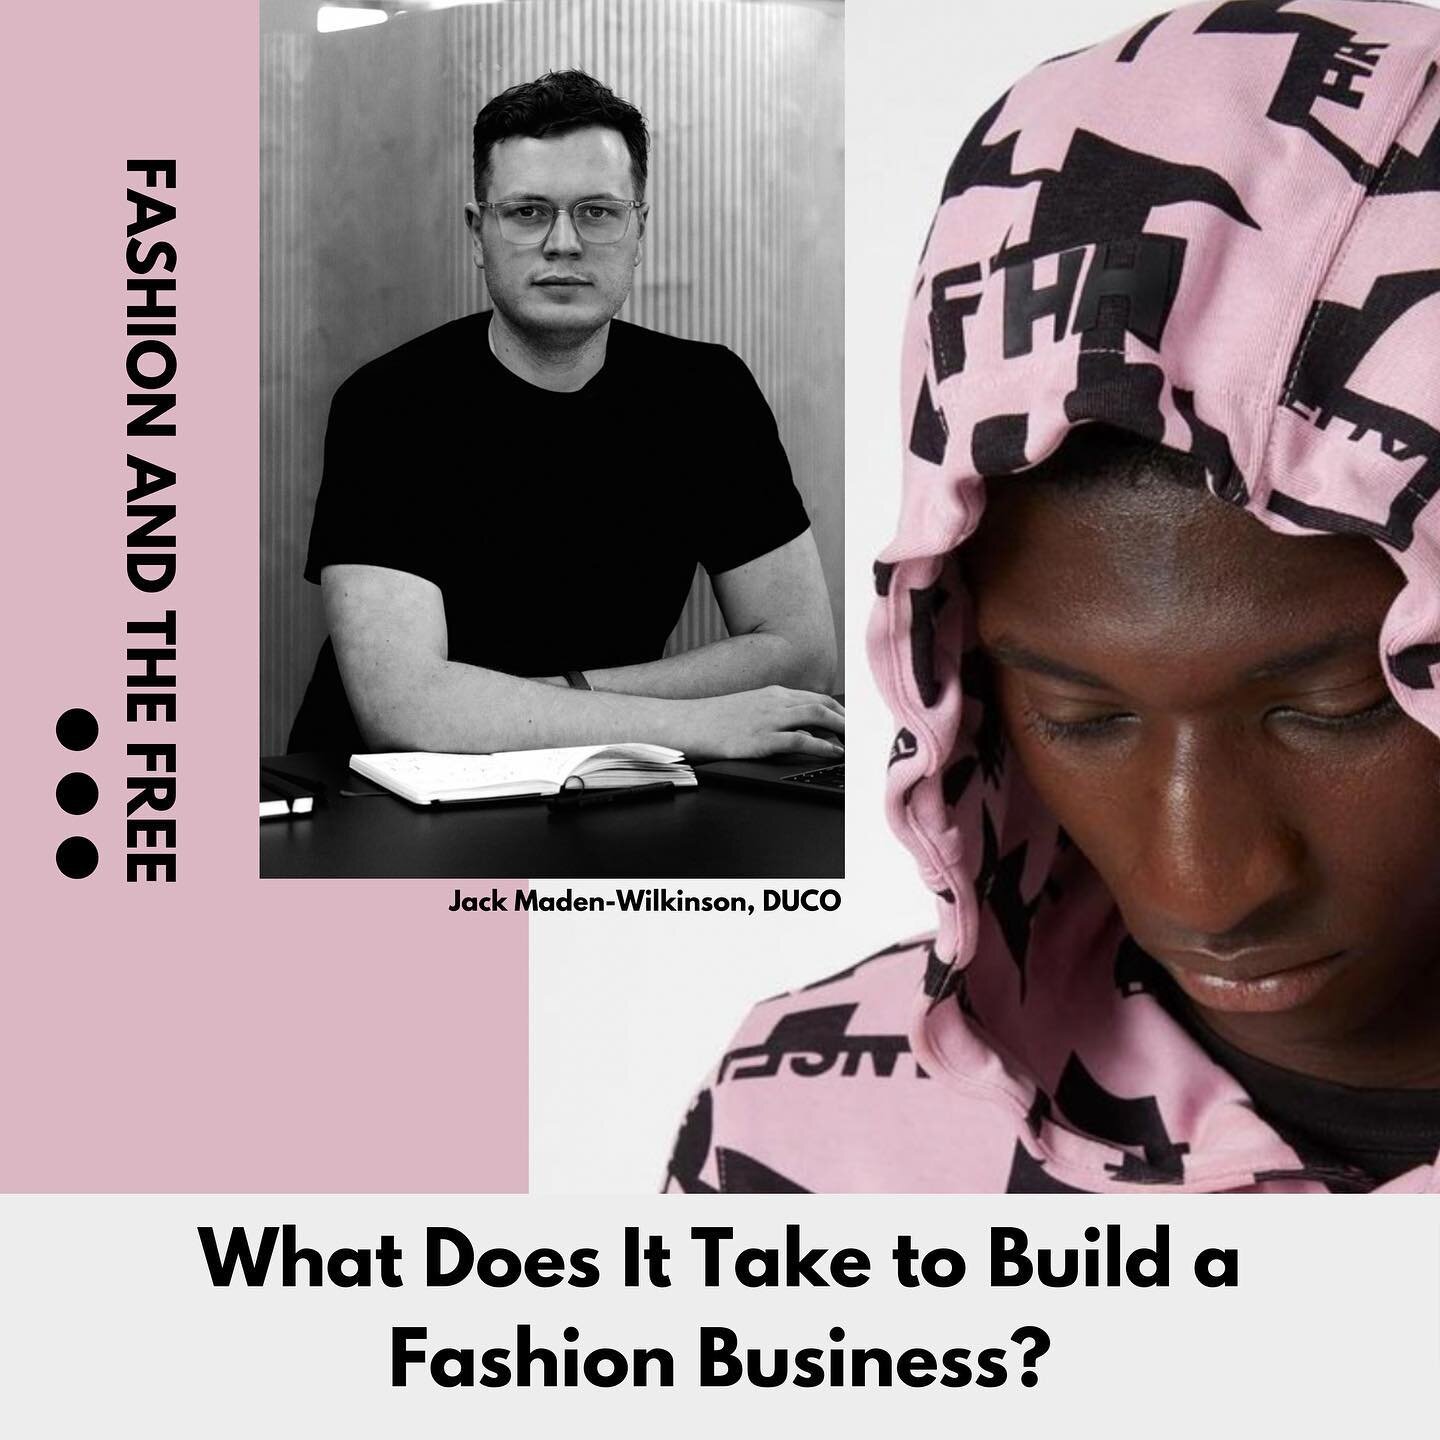 What Does it Take to Build a Fashion Business? 

New Article Alert! 🔗 in bio 

You may recognise these 3 buisness owners from previous articles on the Fashion and the Free site. I wanted to circle back with them to find out all the challenges and &l